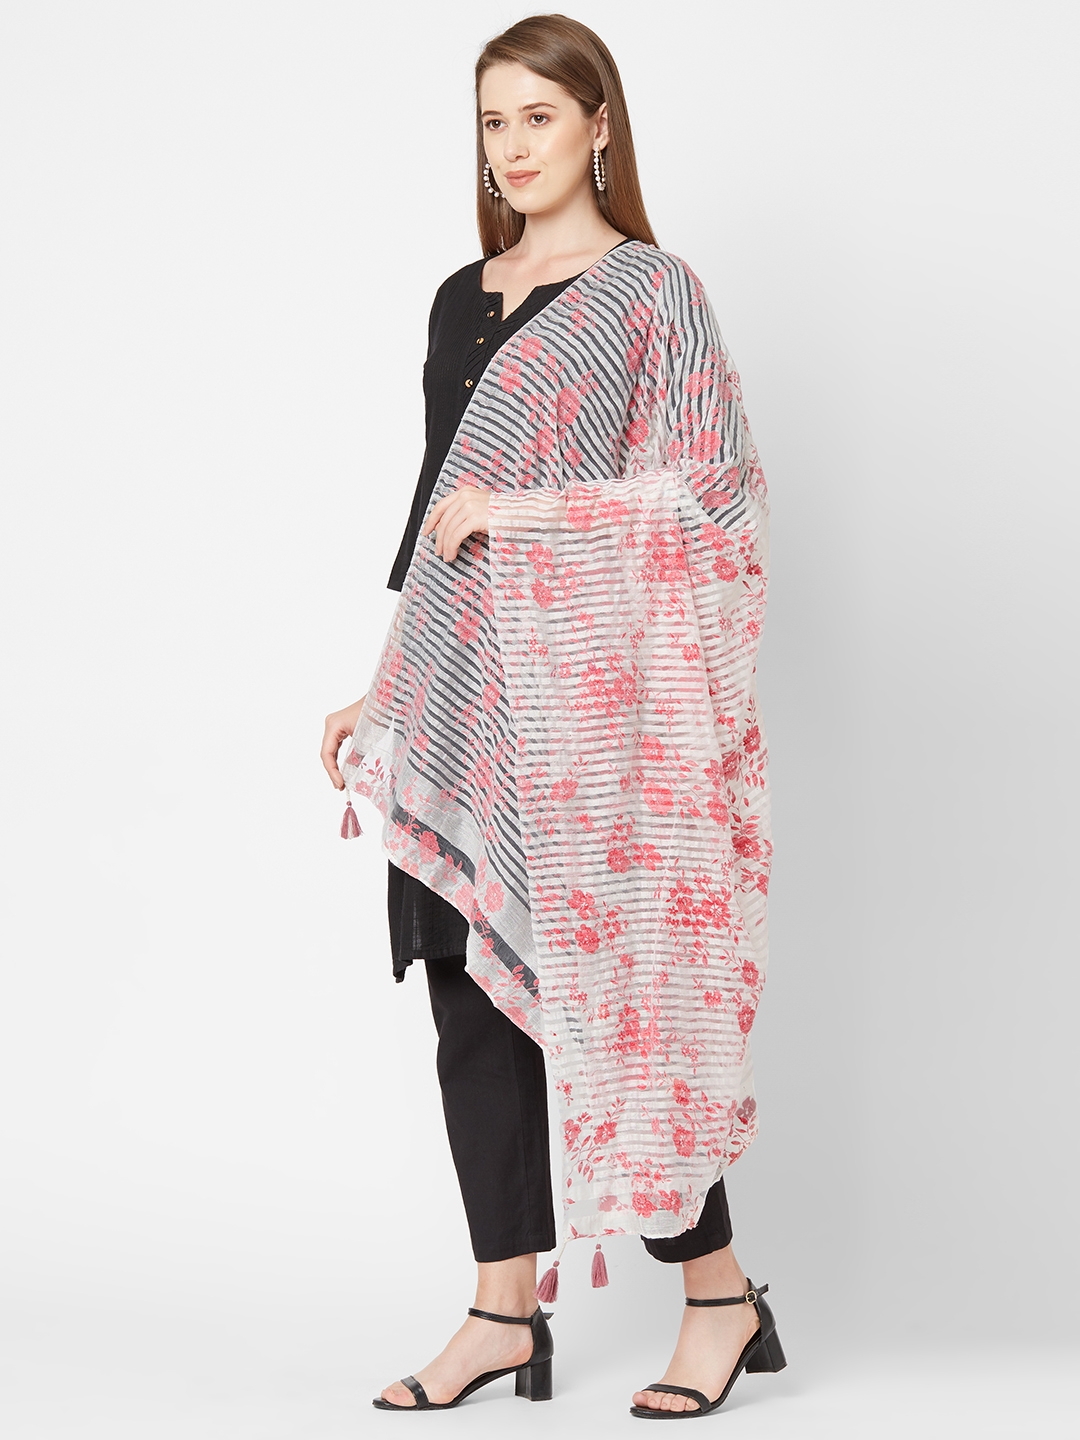 Get Wrapped | Get Wrapped Pink Flock Printed Dupatta with Tassels for Women